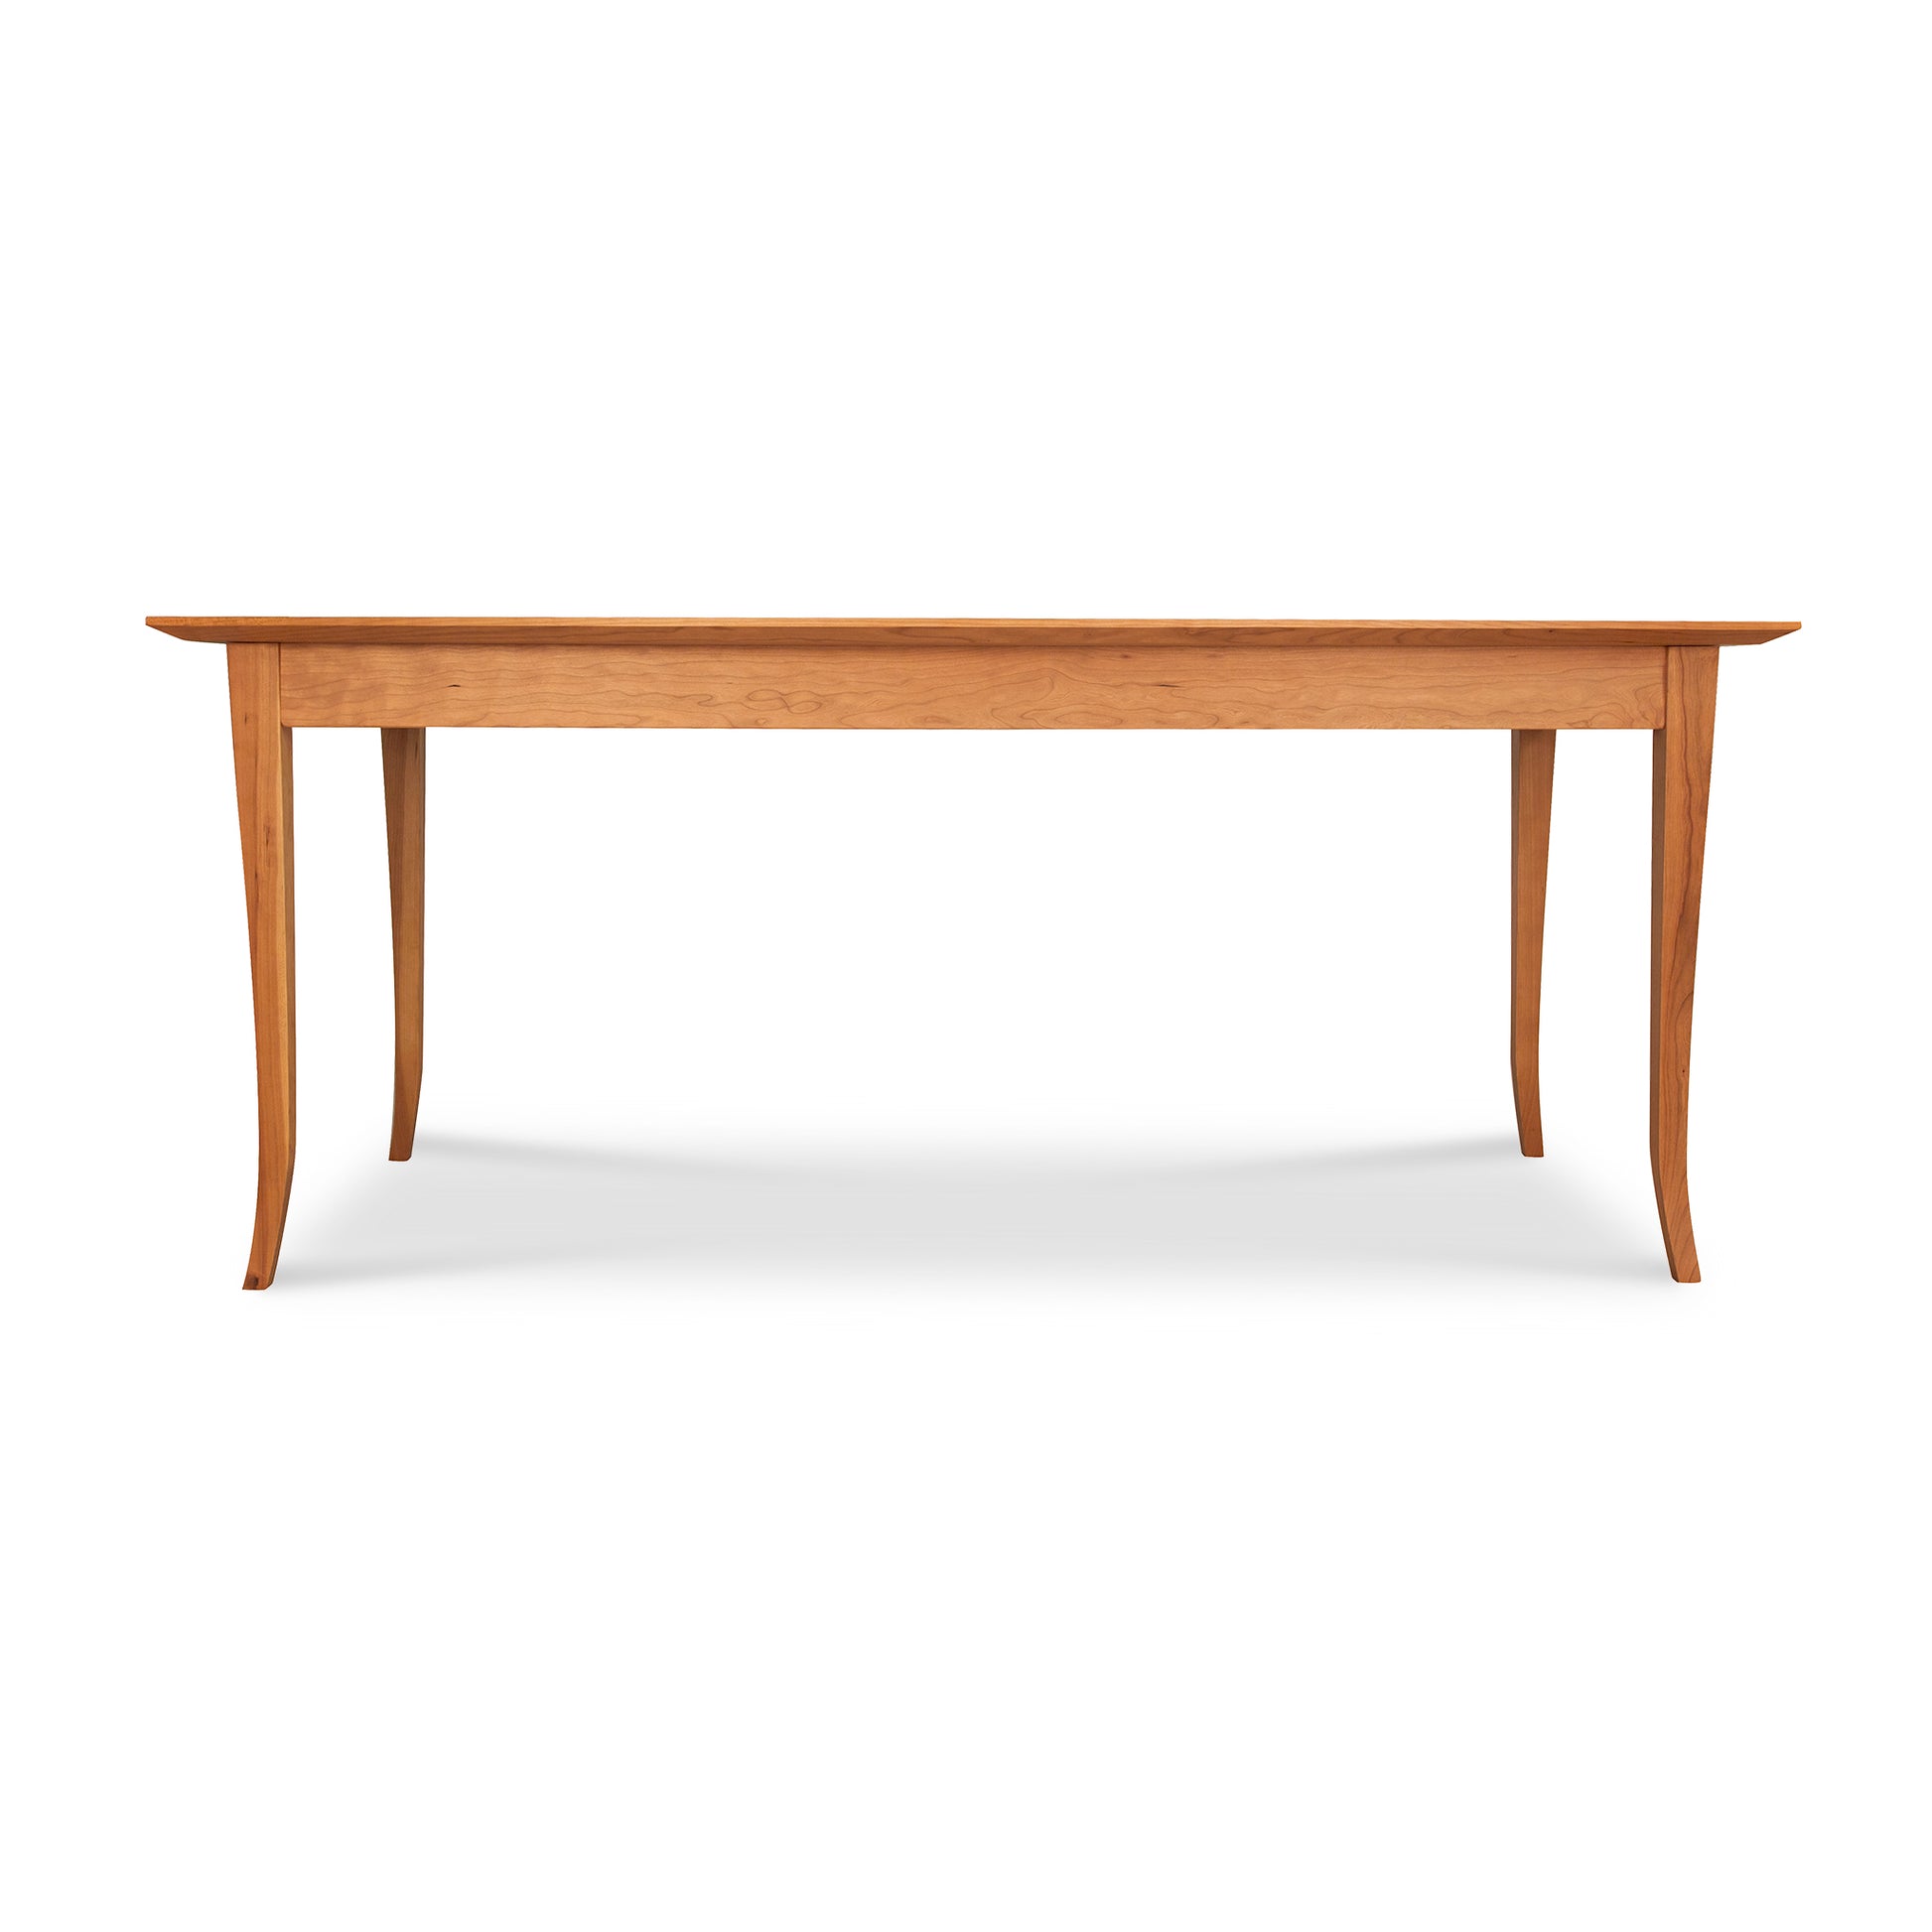 A Classic Shaker Flare Leg Solid Boat Top Table by Lyndon Furniture with a wooden top and flare legs.